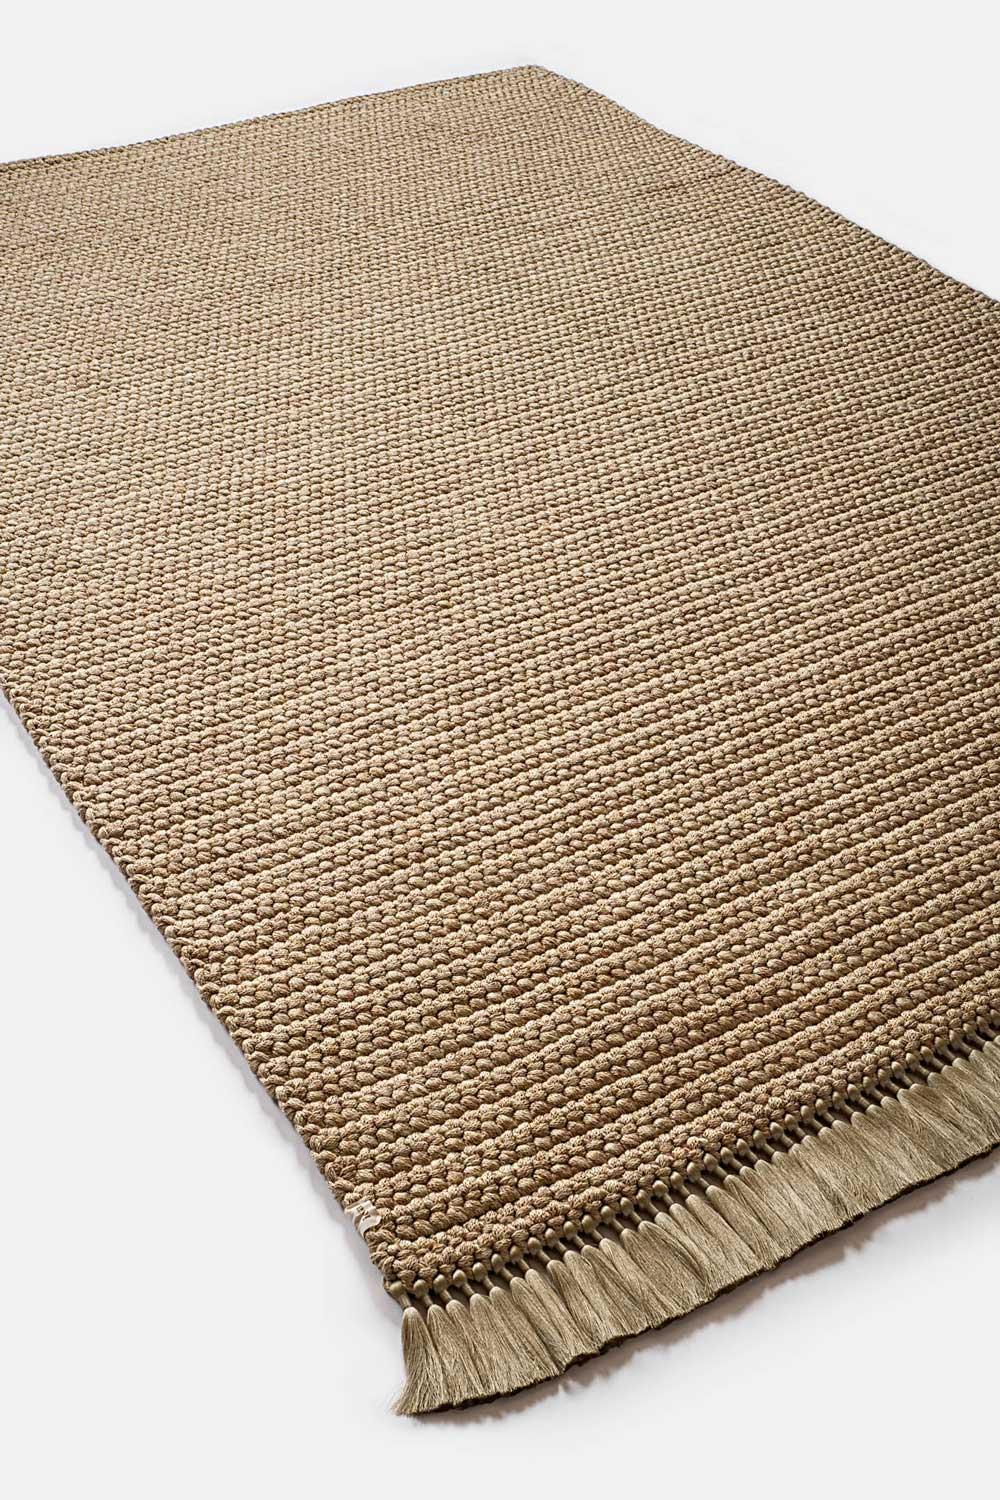 Hand-Crafted Handmade Crochet Thick Rug 170X240 cm in Golden Beige Wine Colors For Sale